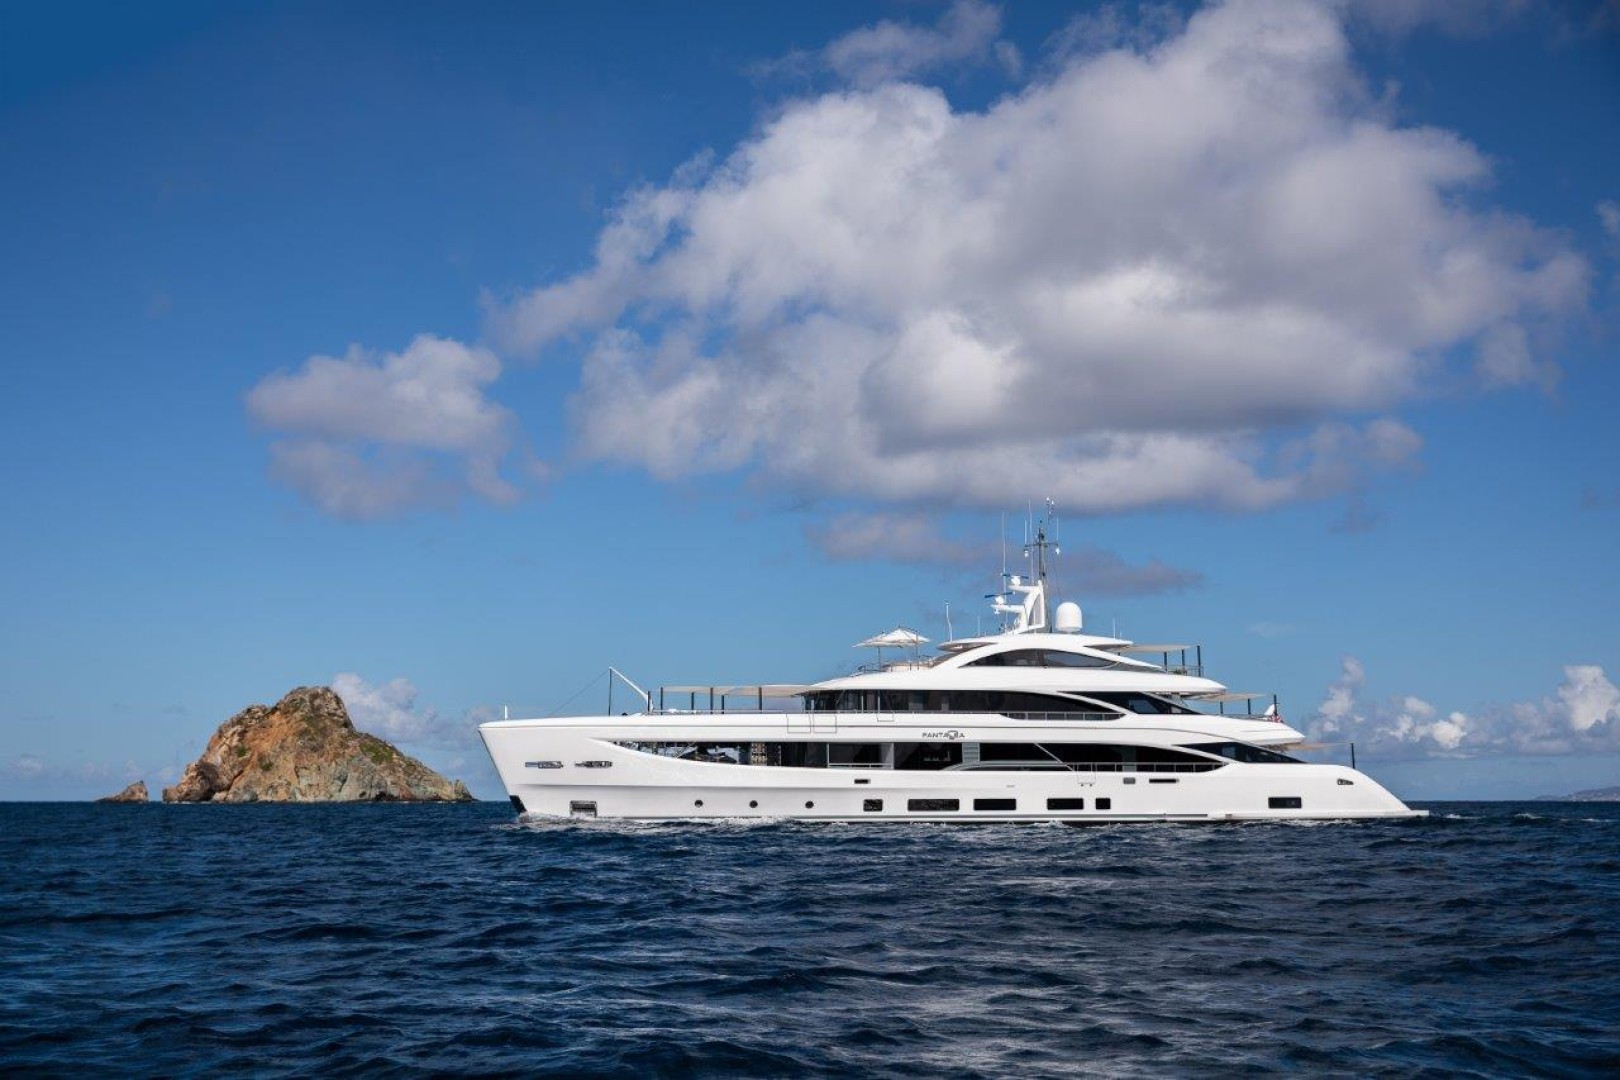 Benetti takes centre stage at the 2023 Monaco Yacht Show with two new models